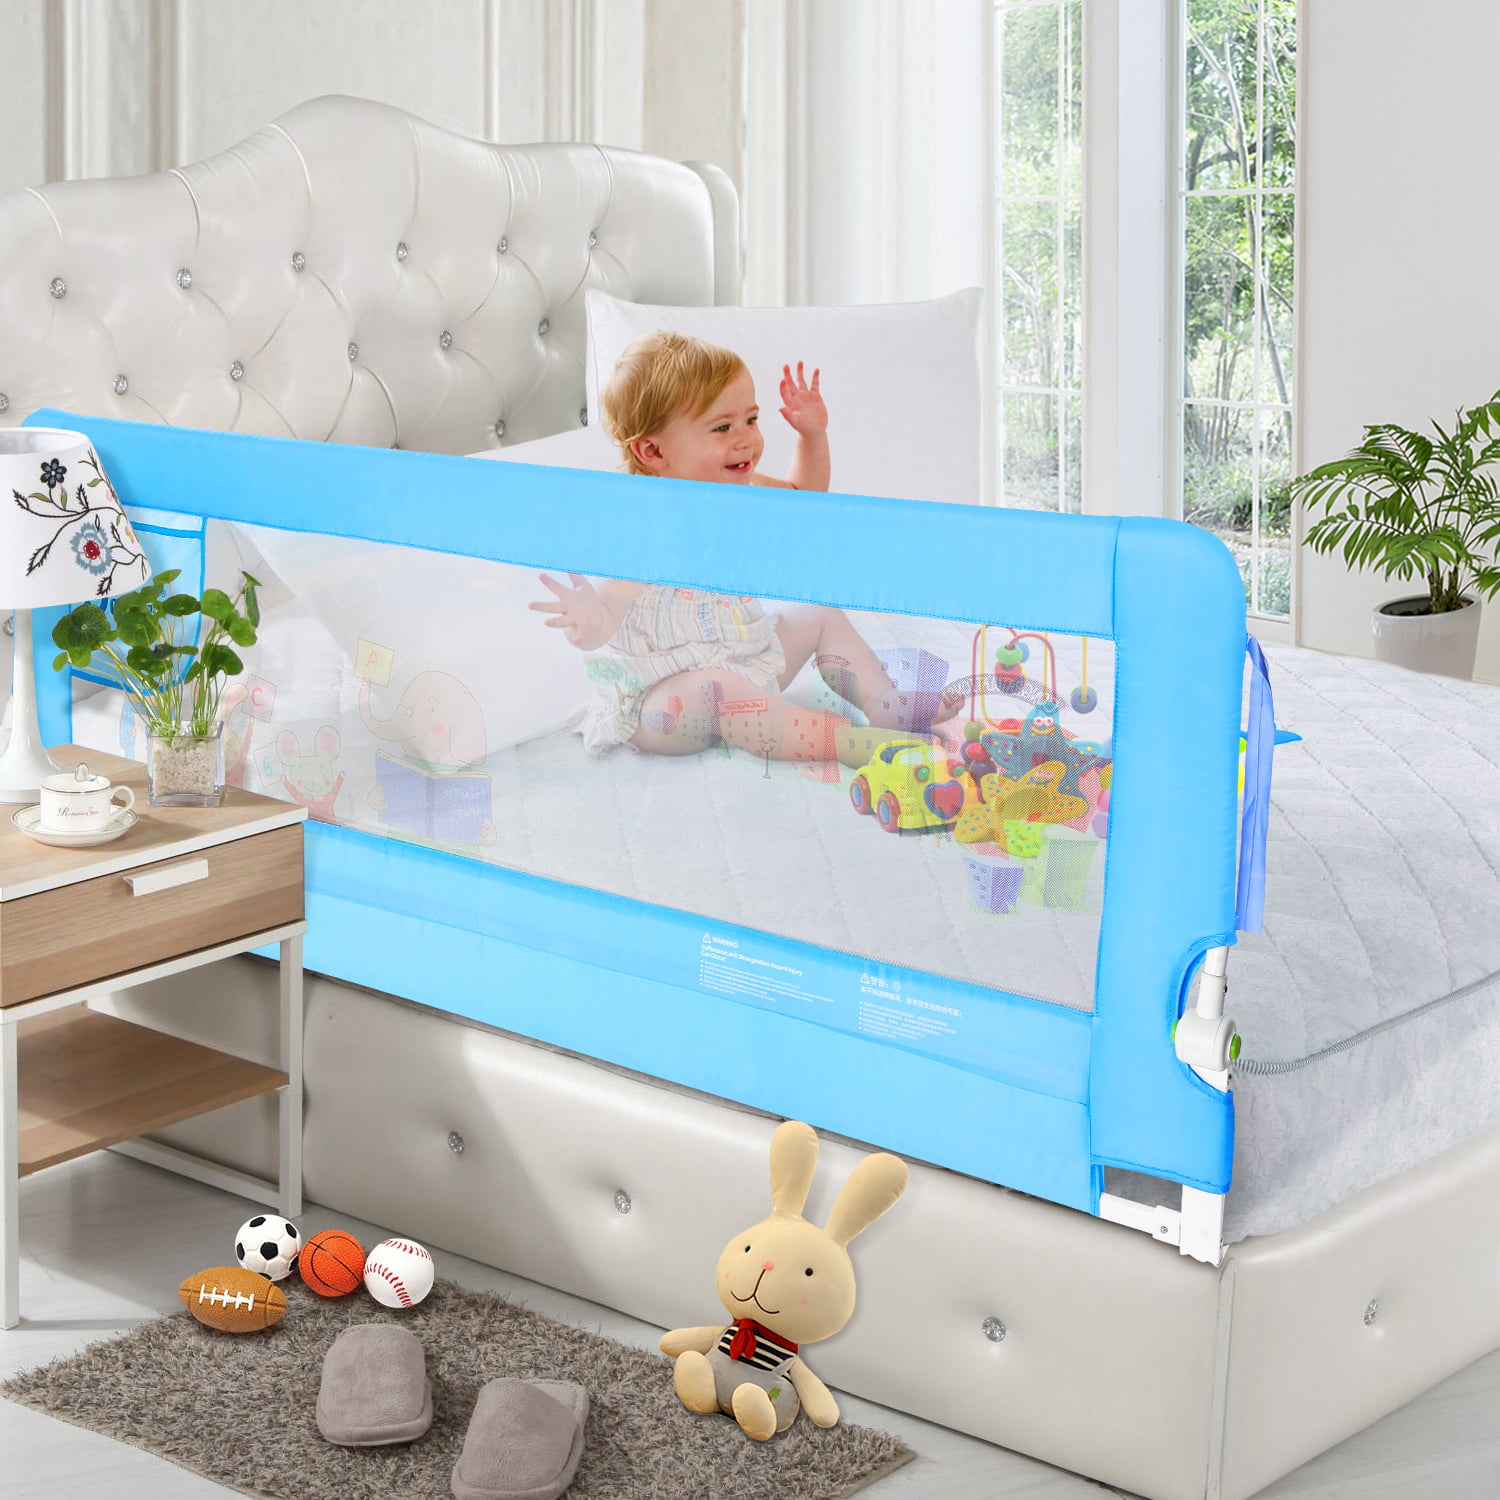 Beige Color Single Foldable Safety Bedrail with Ventilated Mesh for Toddlers Safe Sleep BABY ELF 47inch Bed Rail Queen Size Bed Guard for Kids